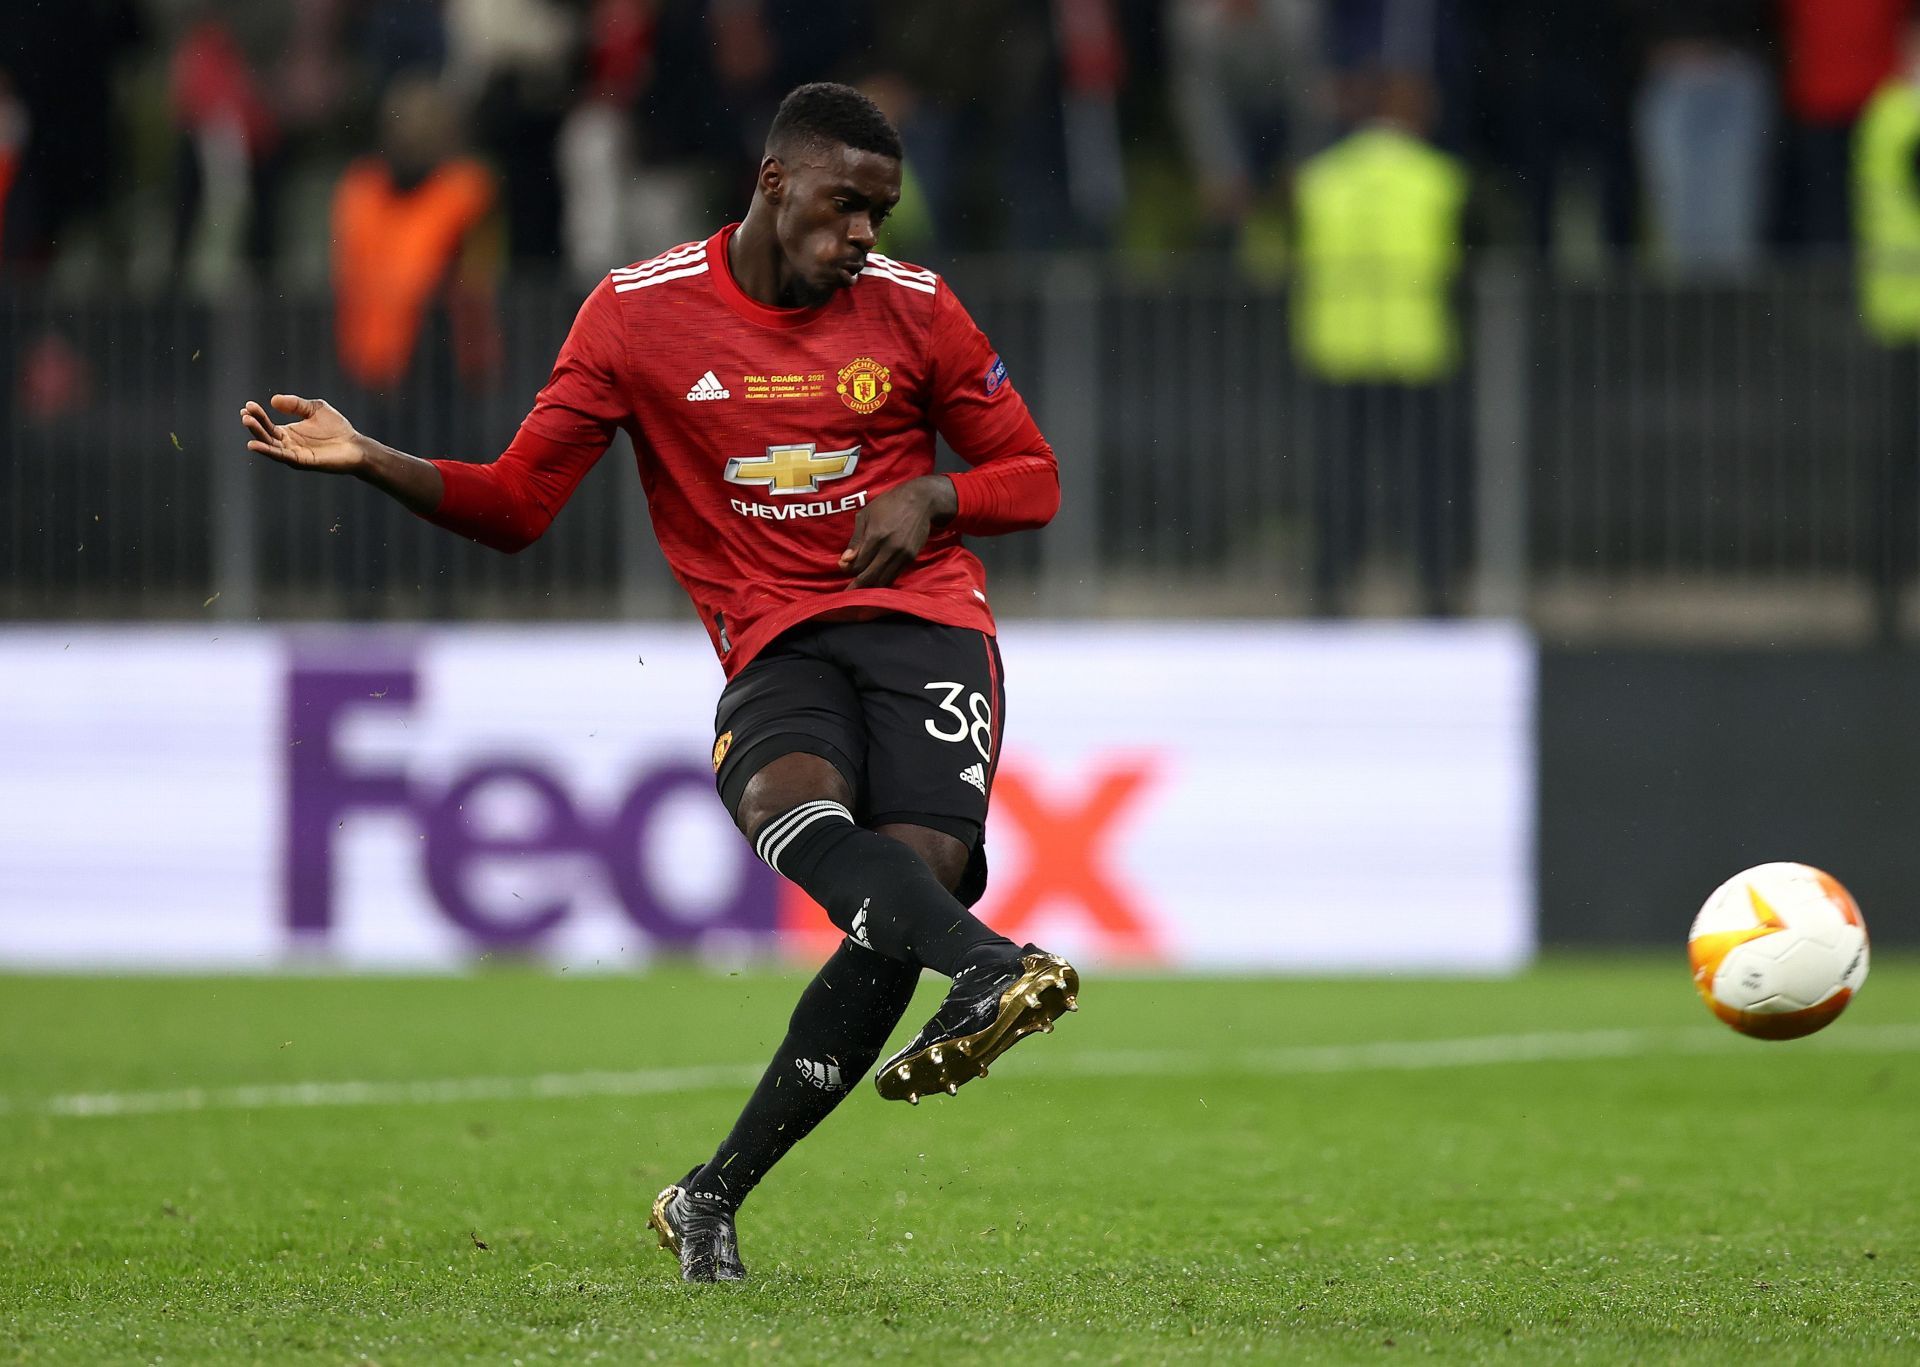 Tuanzebe, 25, is set to leave the Red Devils.